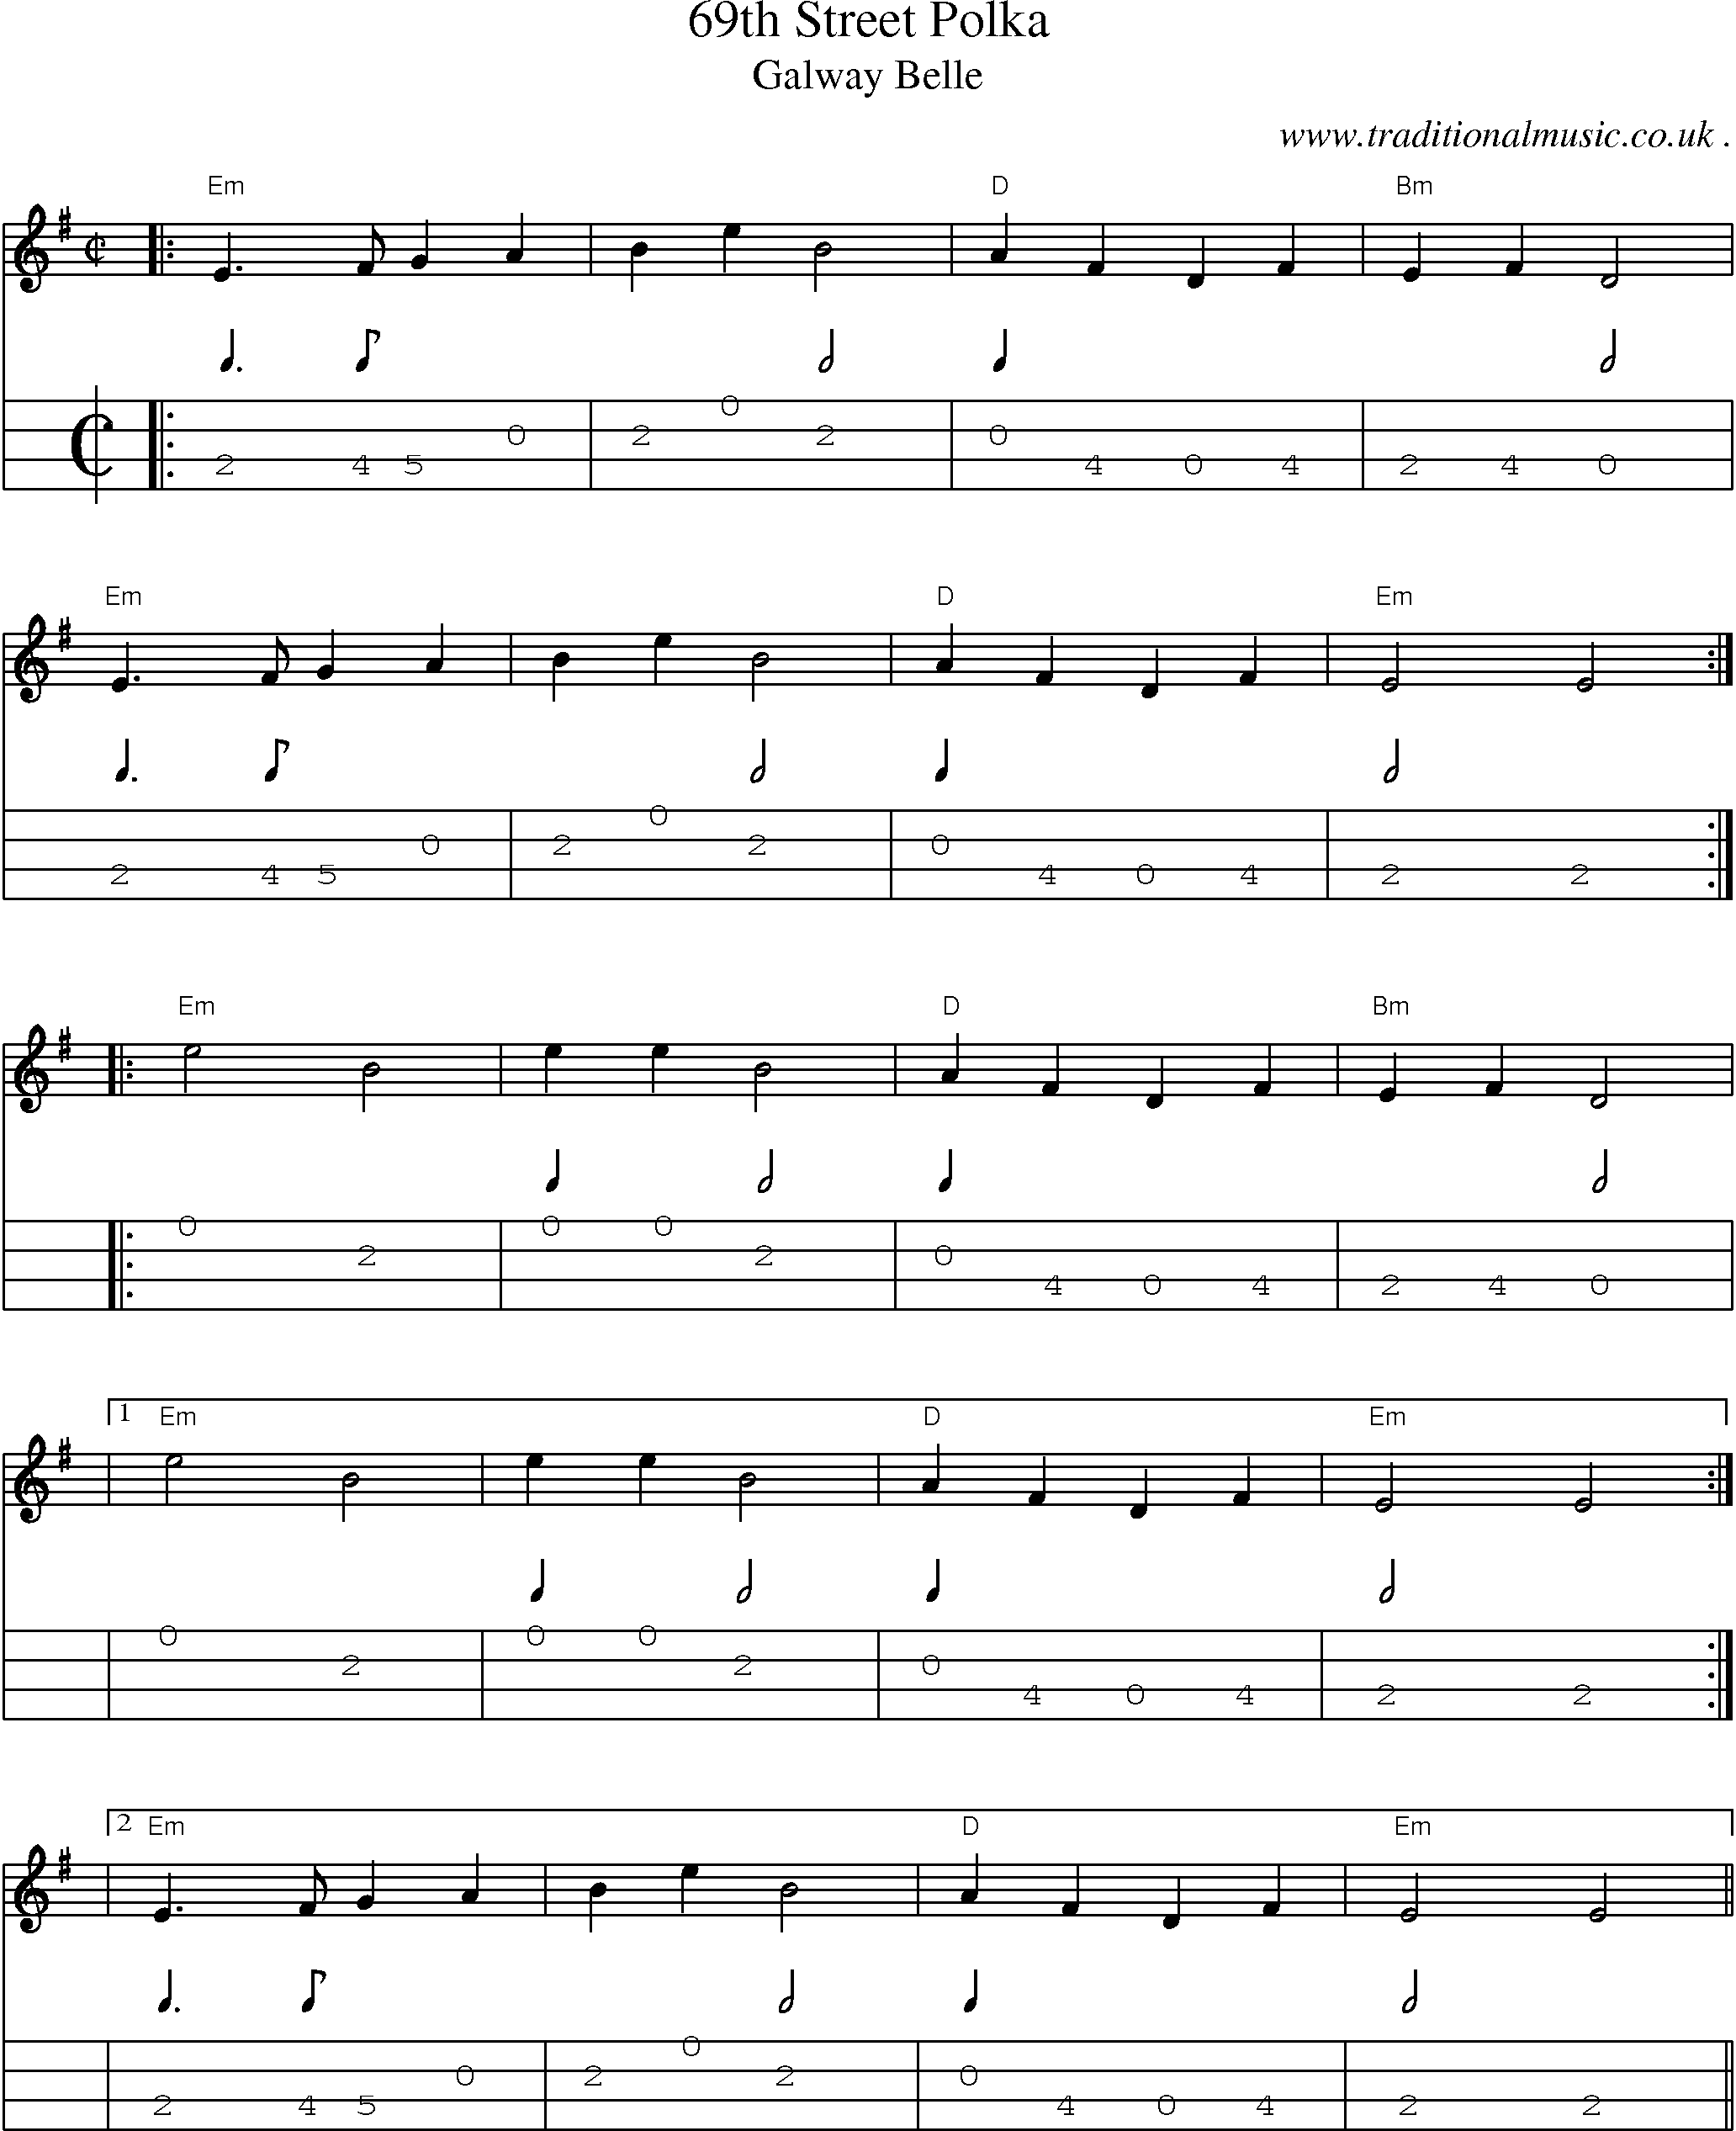 Music Score and Guitar Tabs for 69th Street Polka